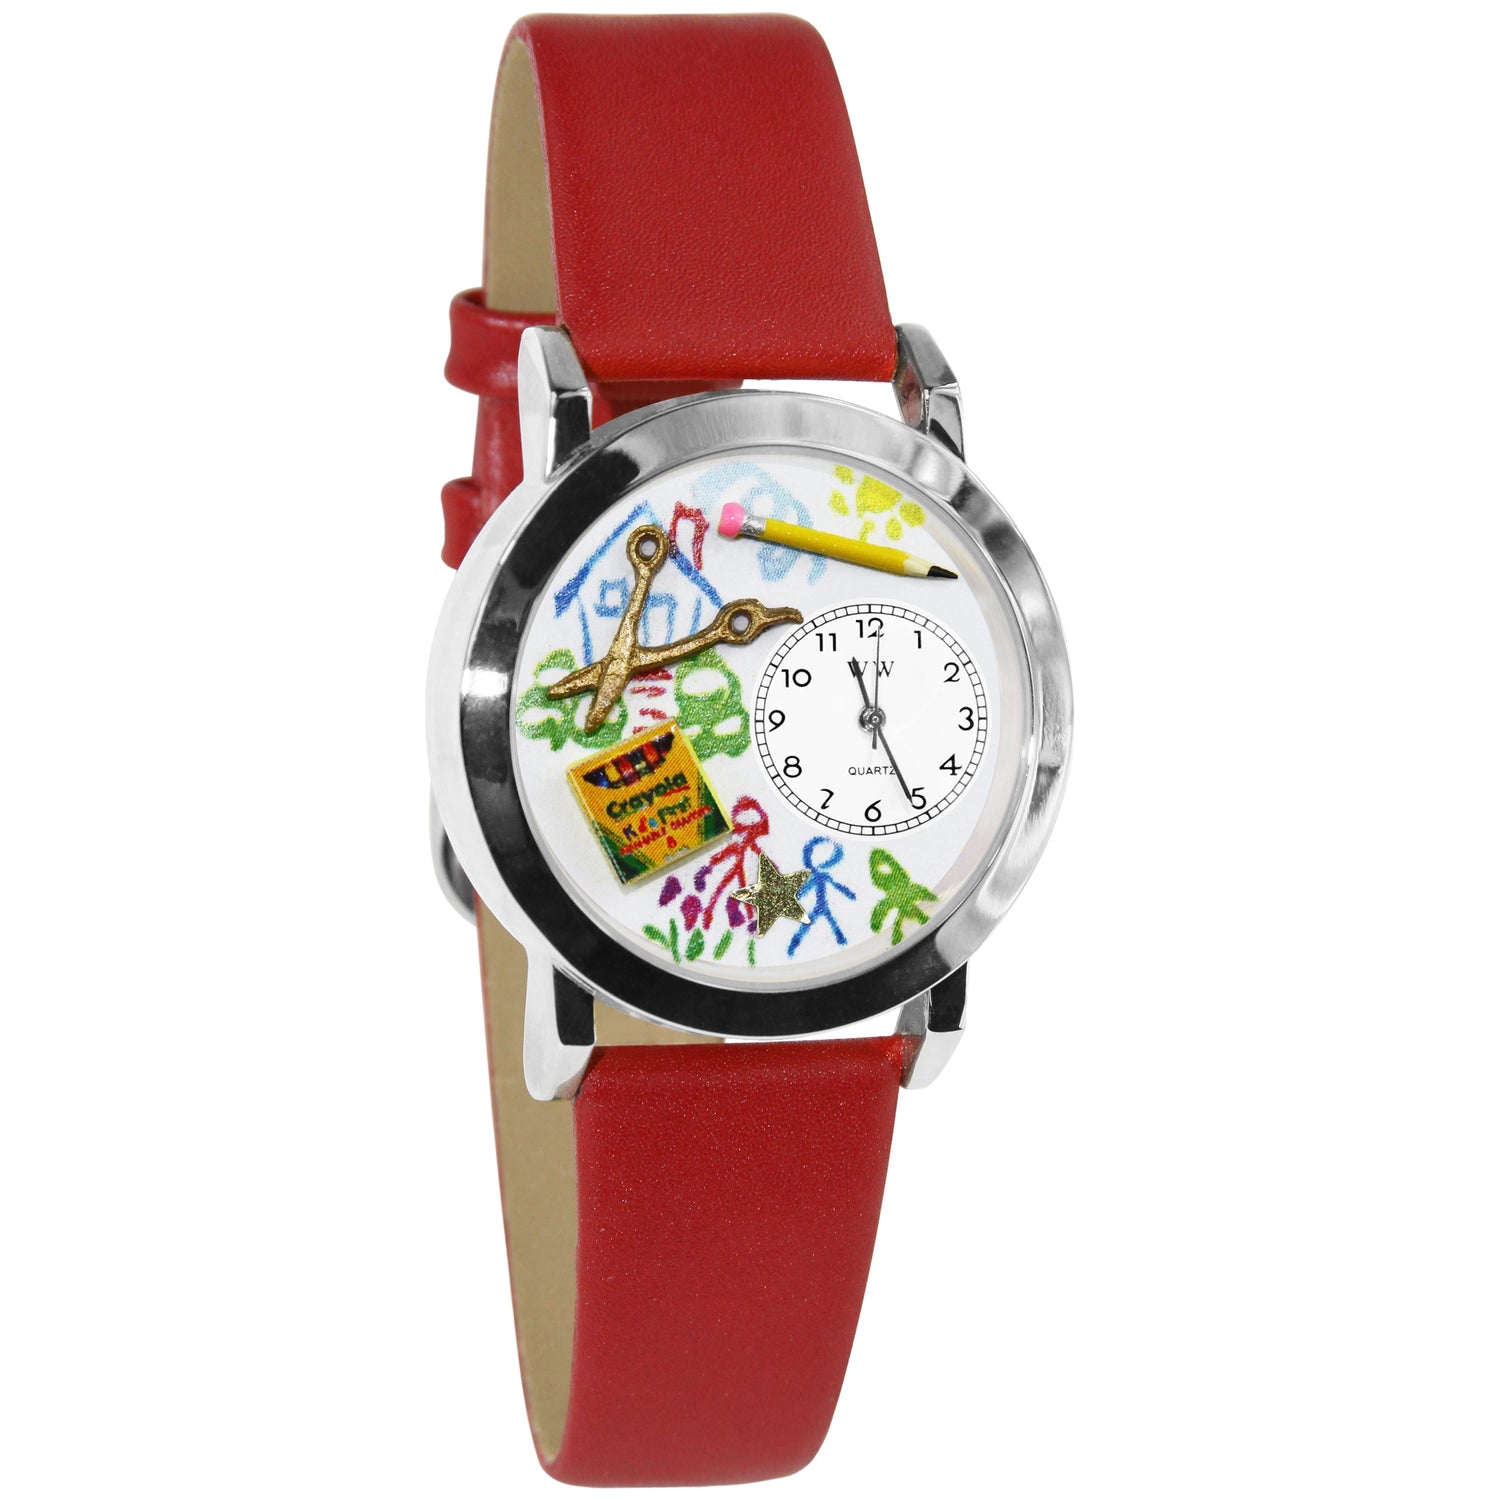 Whimsical Gifts | Preschool Teacher 3D Watch Small Style | Handmade in USA | Professions Themed | Teacher | Novelty Unique Fun Miniatures Gift | Silver Finish Red Leather Watch Band